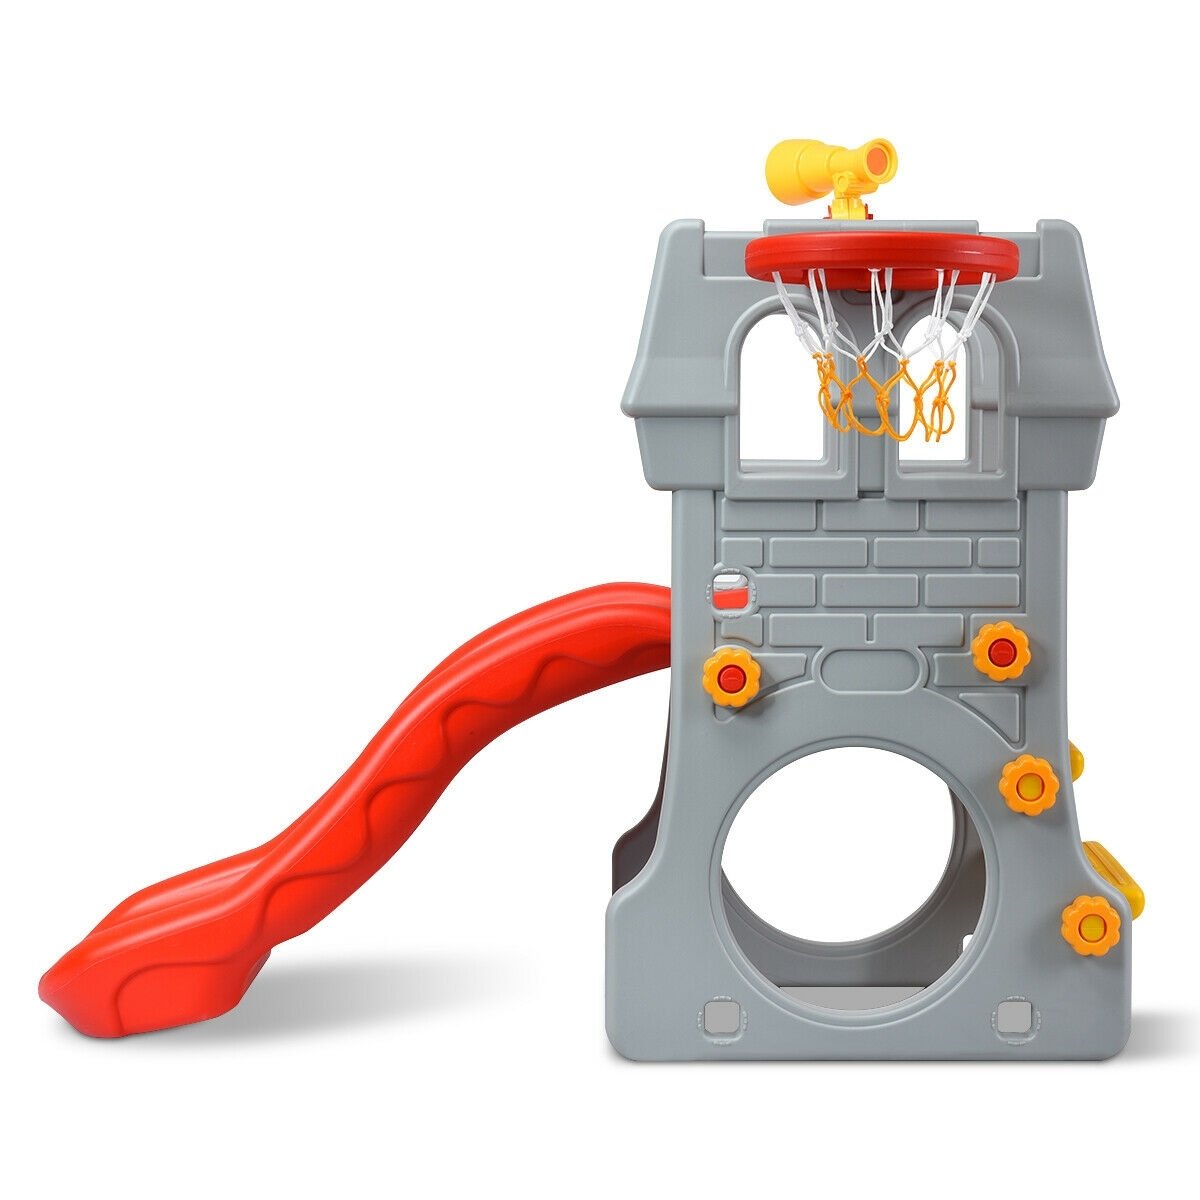 5 in 1 Toddler Climber Slide Playset with Basketball Hoop and Telescope, Multicolor - Gallery Canada